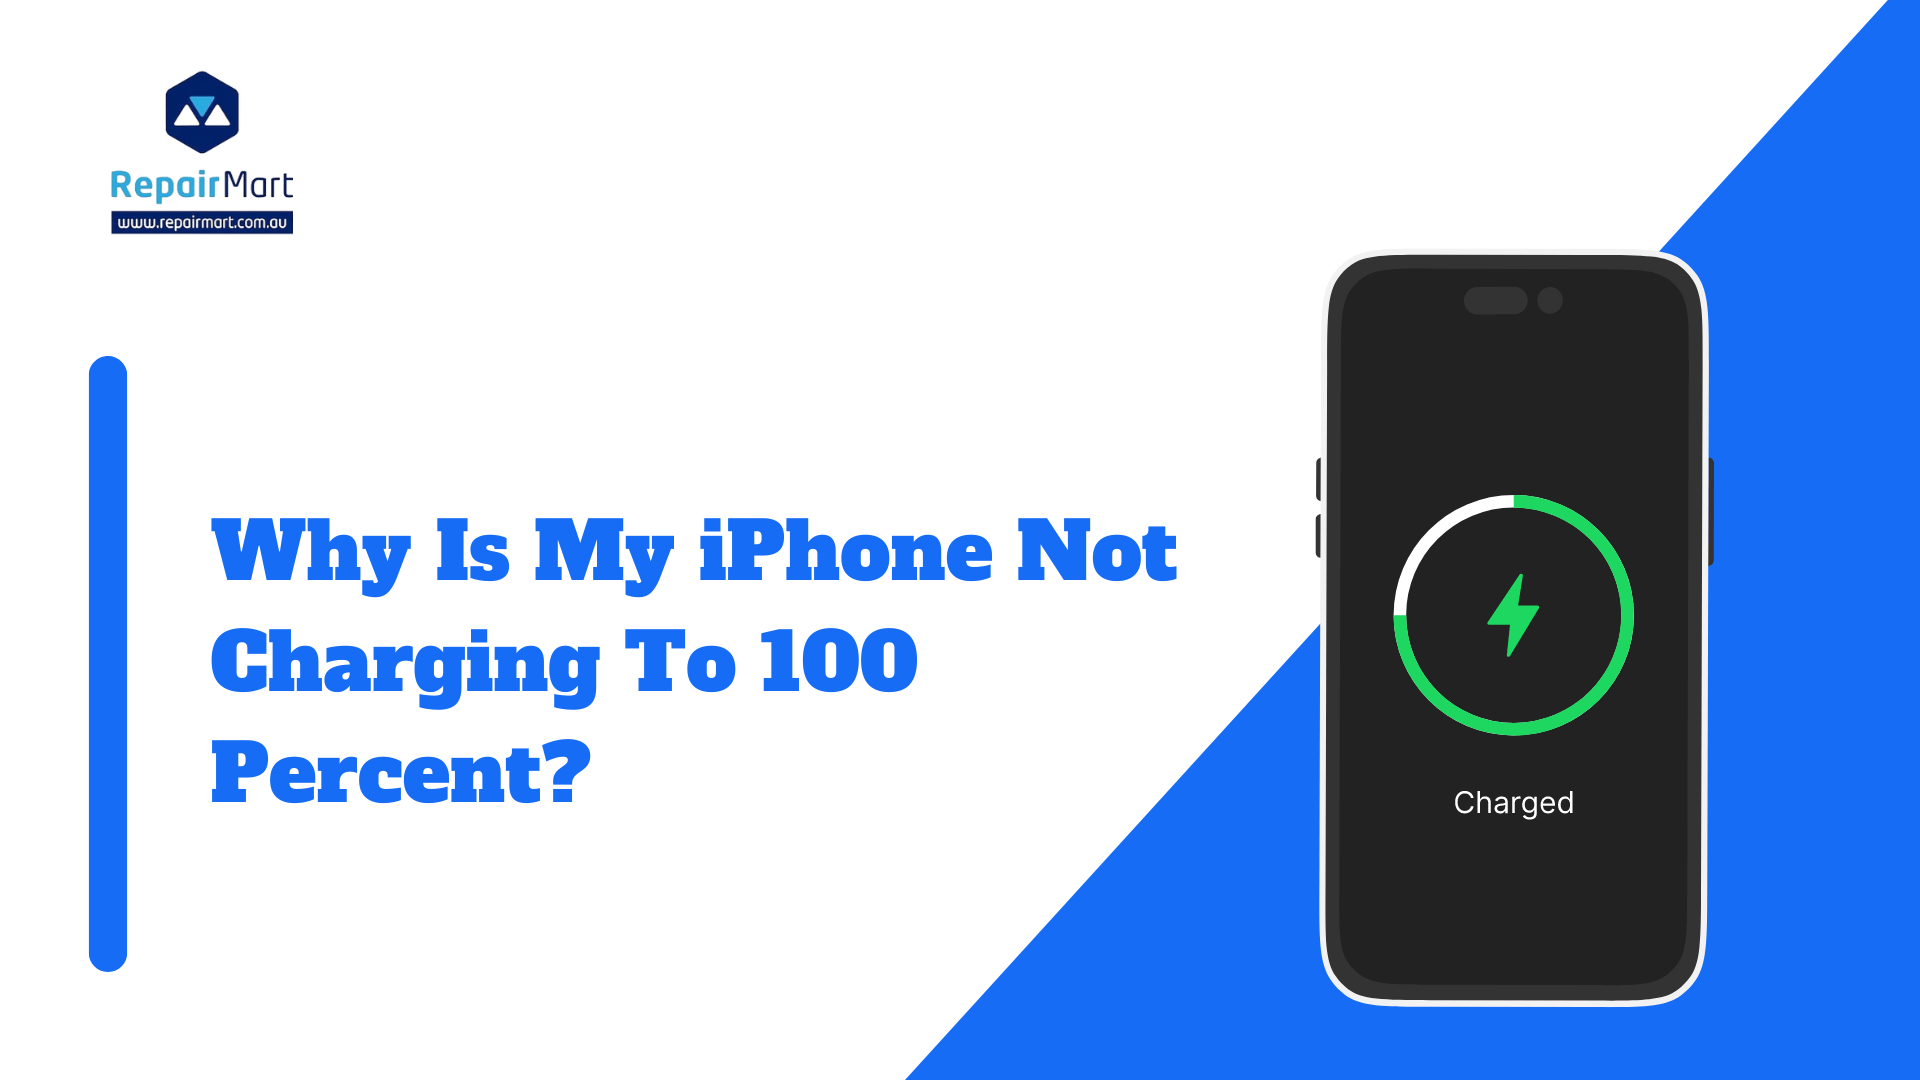 Why Is My iPhone Not Charging to 100 Percent